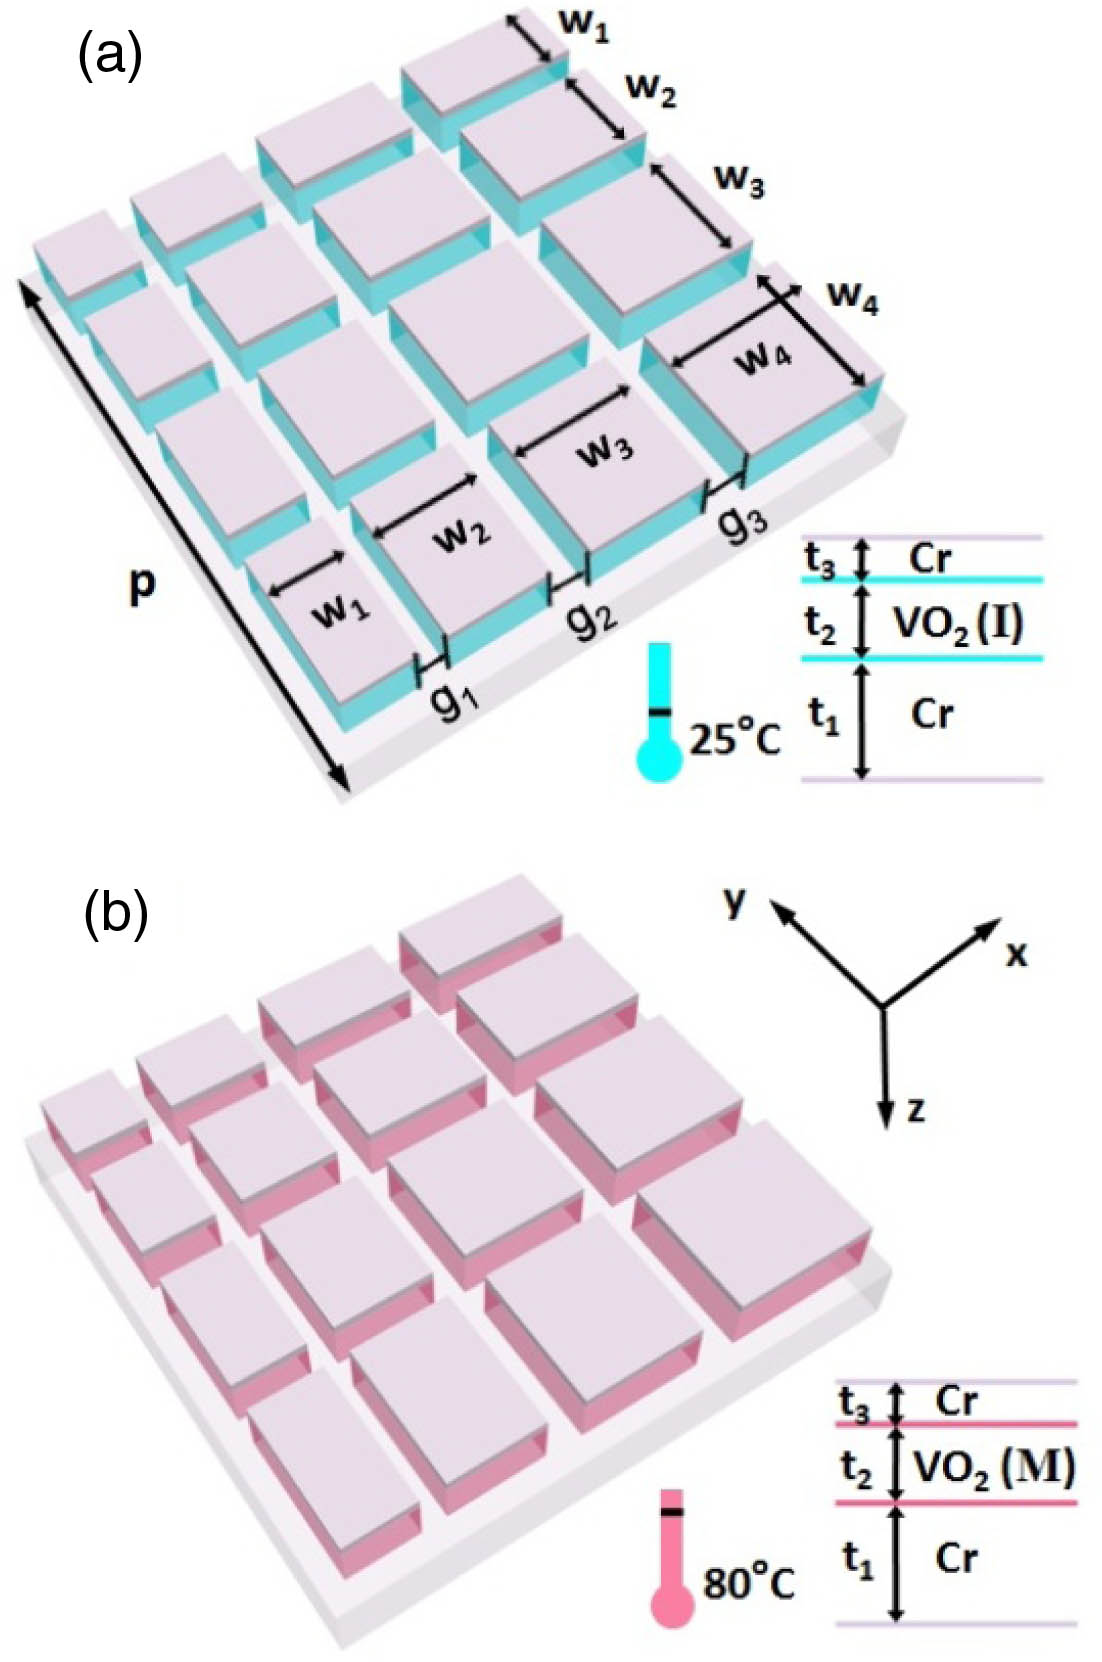 Schematic diagrams of the tunable and scalable metamaterial ultra-broadband absorber with the VO2 spacer in the (a) insulating phase and (b) metallic phase. Here, a group of multi-width Cr−VO2 sub-cells is placed directly on the surface of a uniform Cr substrate. Parameters are set as p=1900 nm, w1=200 nm, w2=300 nm, w3=400 nm, w4=500 nm, t1=300 nm, t2=260 nm, t3=30 nm, g1=80 nm, g2=120 nm, g3=140 nm. The surrounding material is air.